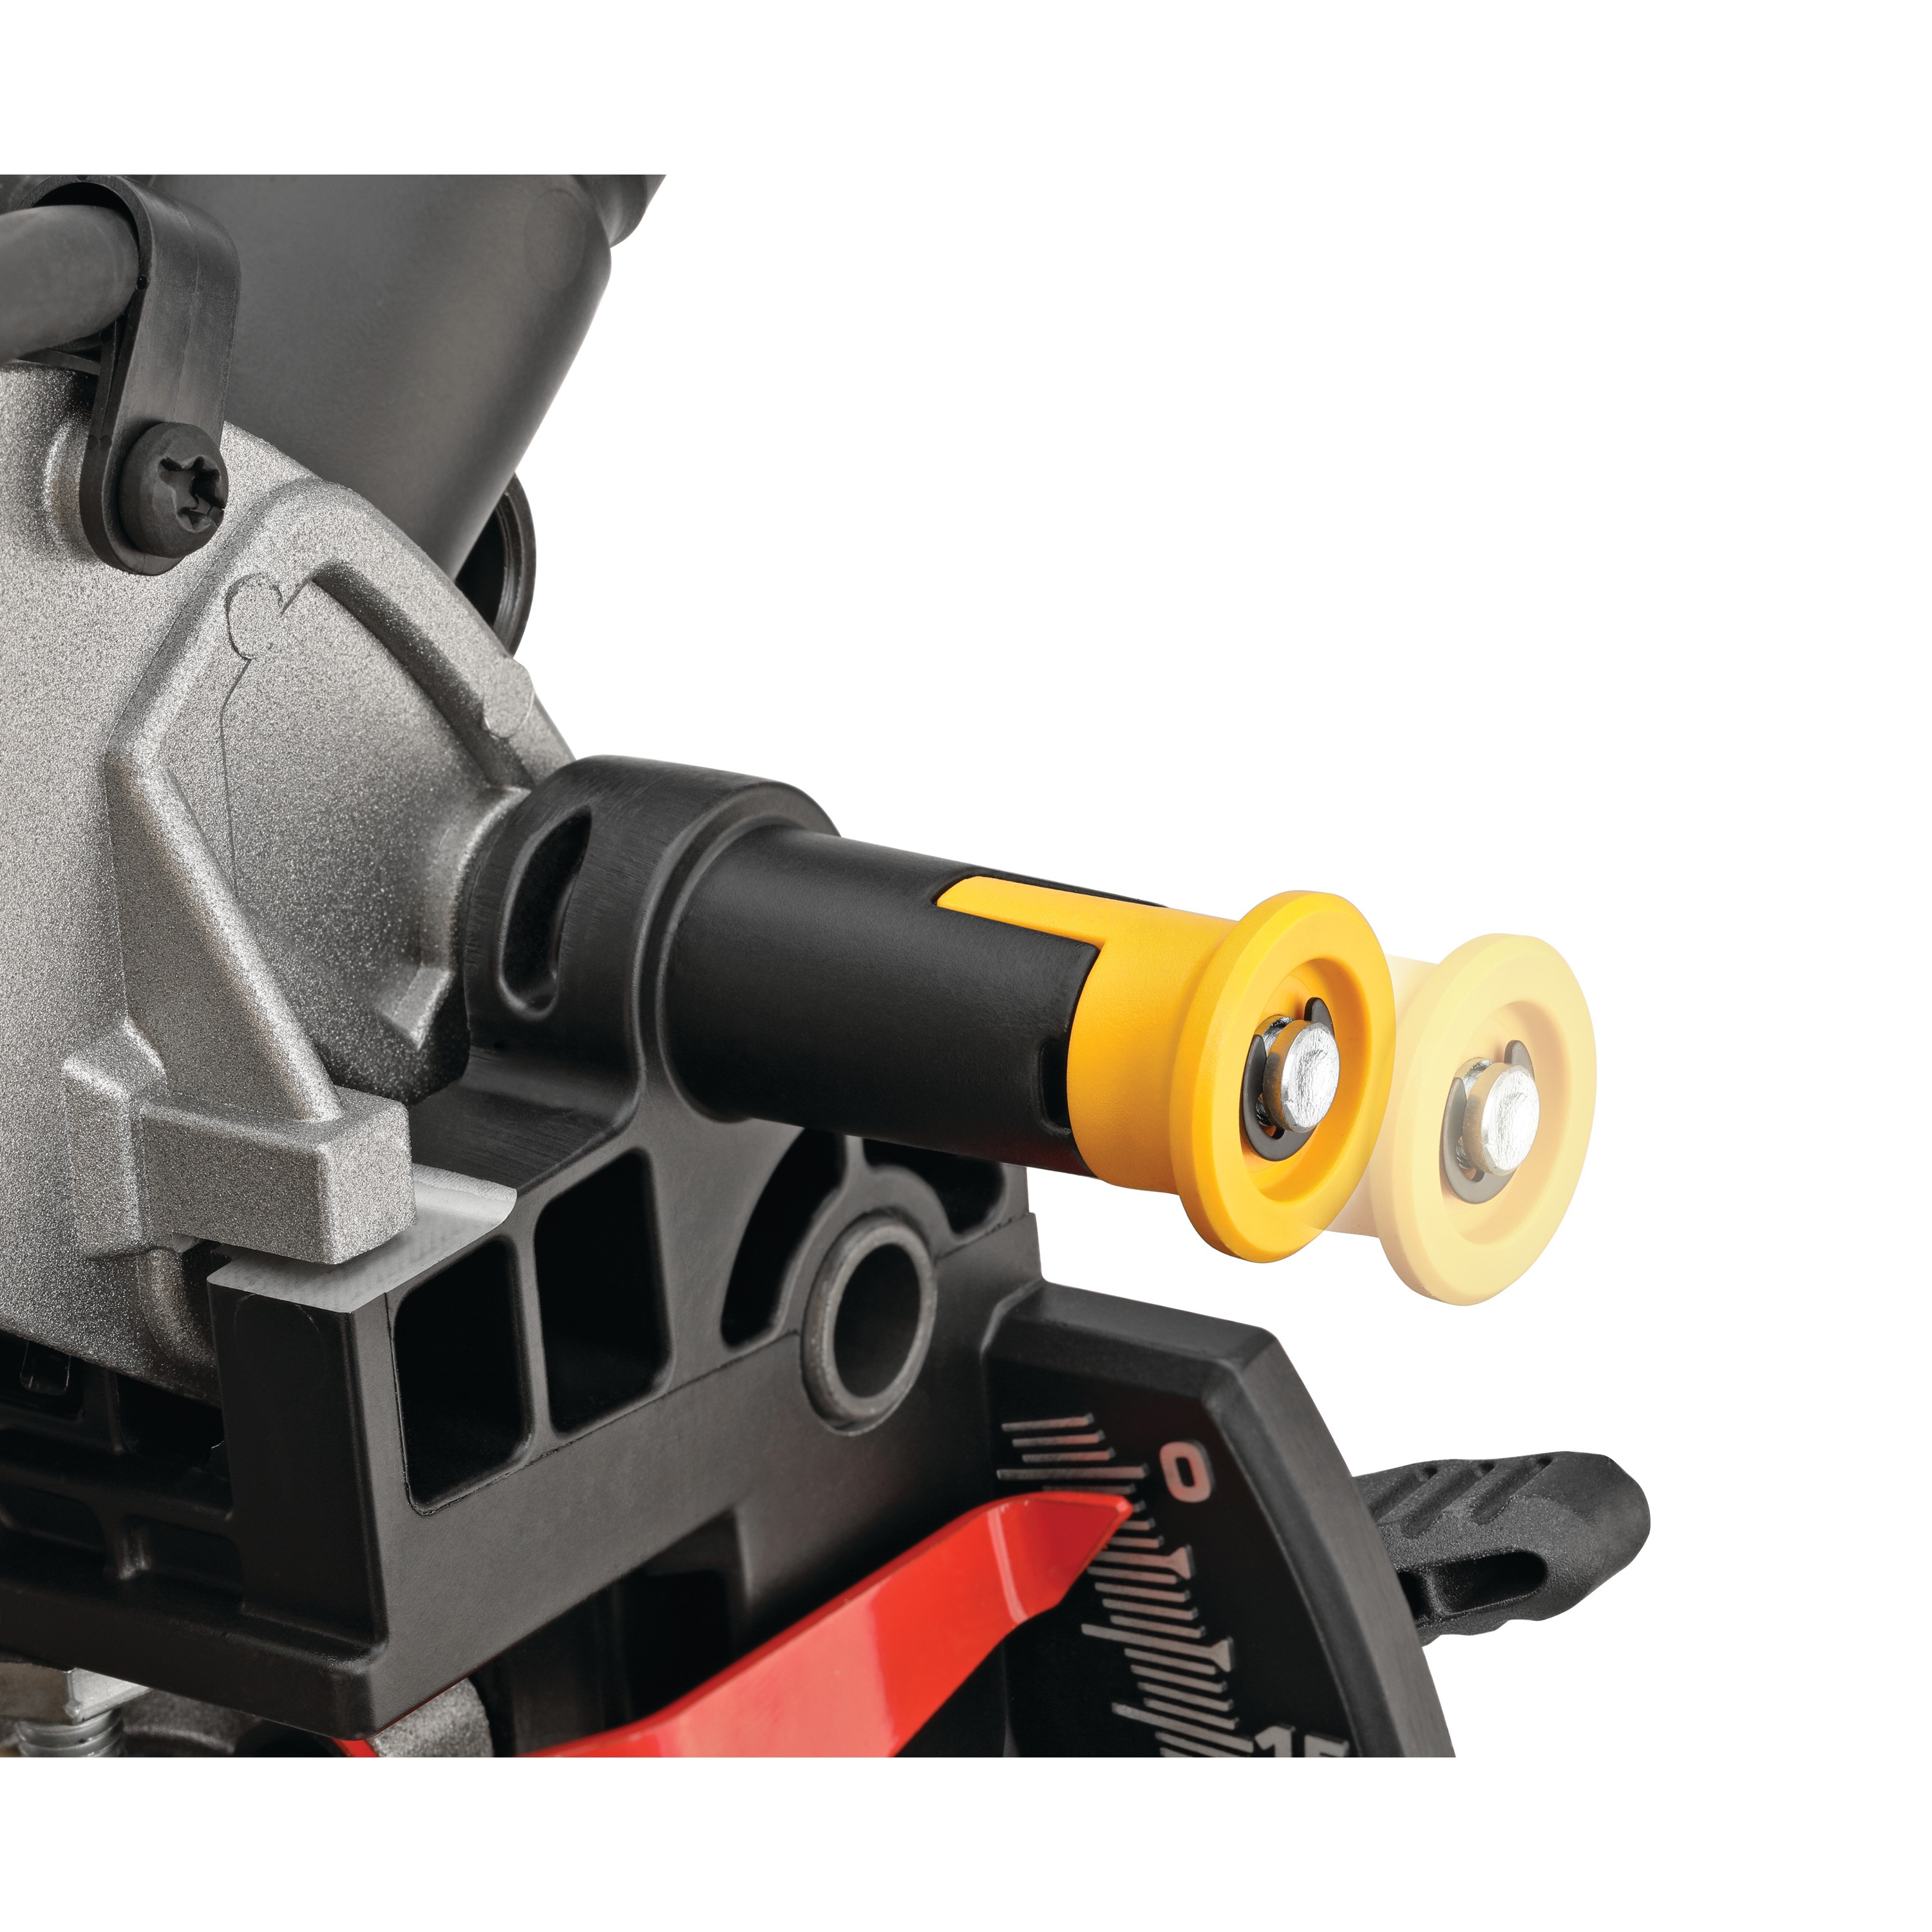 Turn knob lock feature of electric single bevel compound miter saw.